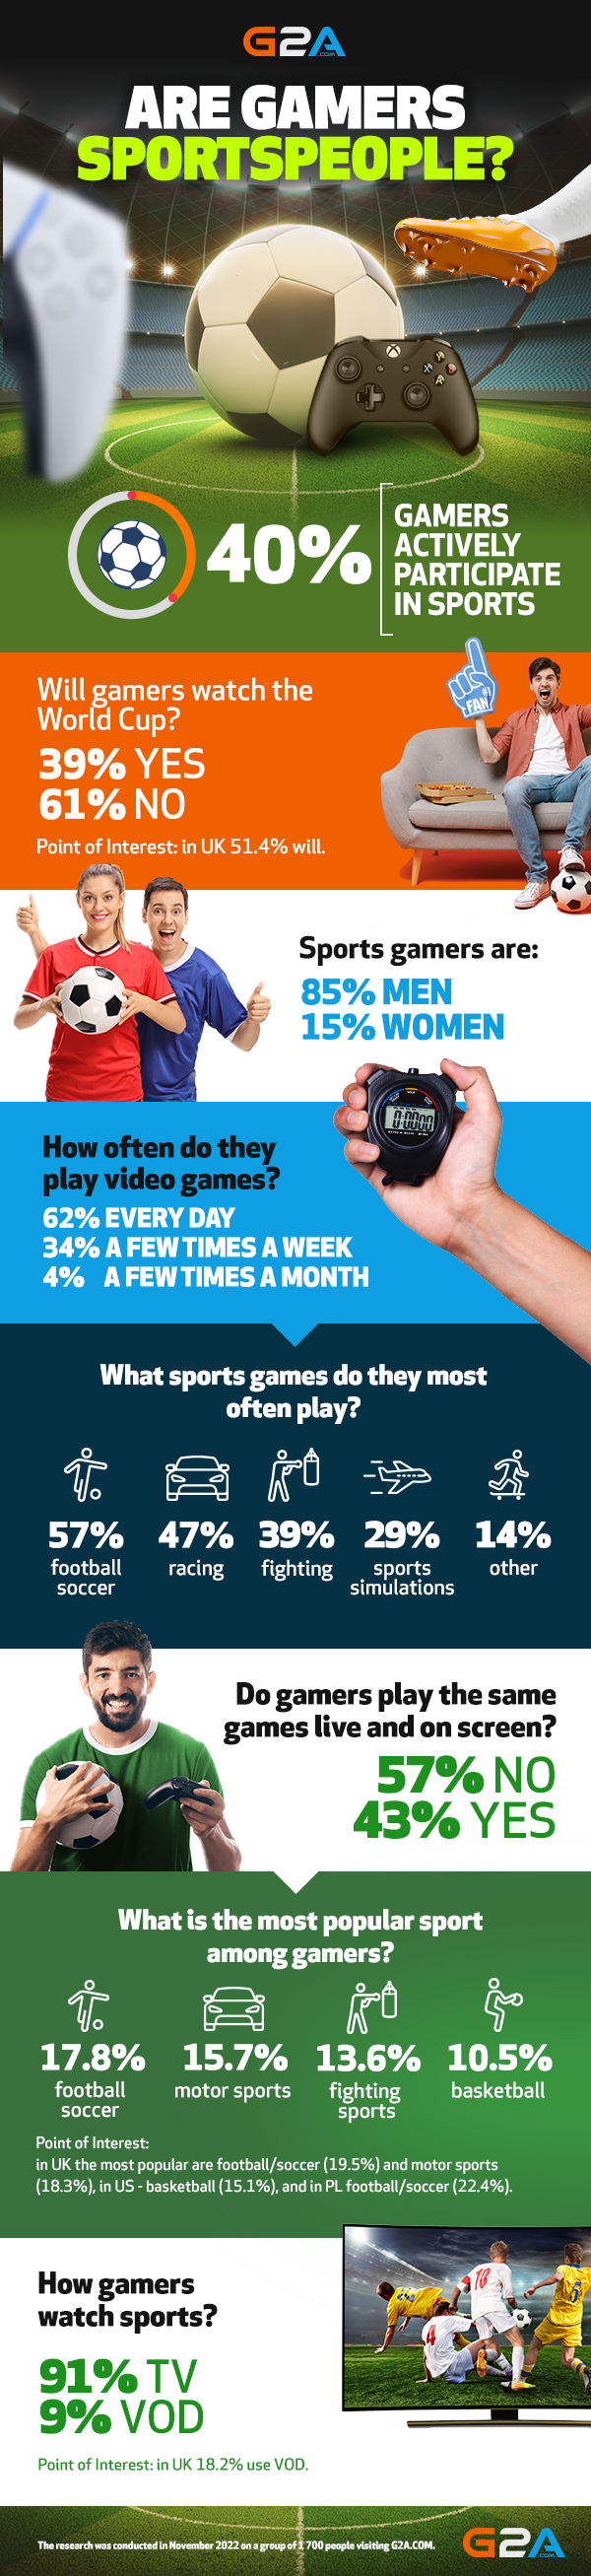 Are gamers athletes infographic?